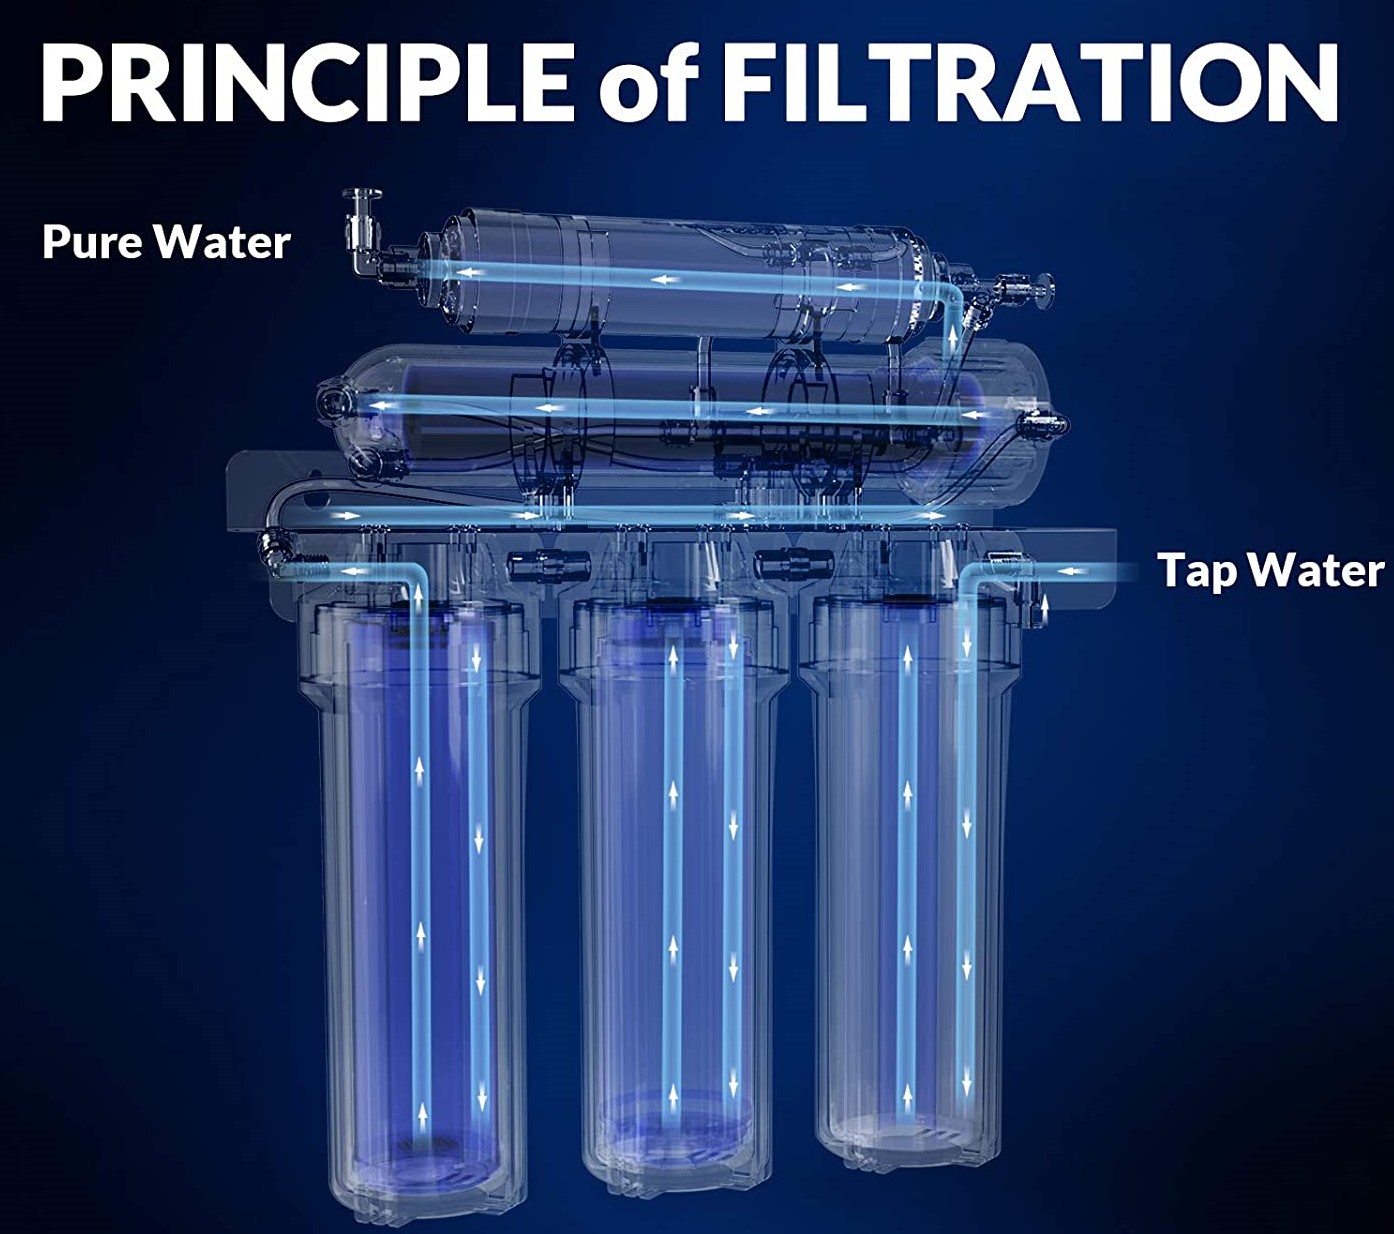 WATER_FLOW_PRINCIPLES_FLITRATION2022